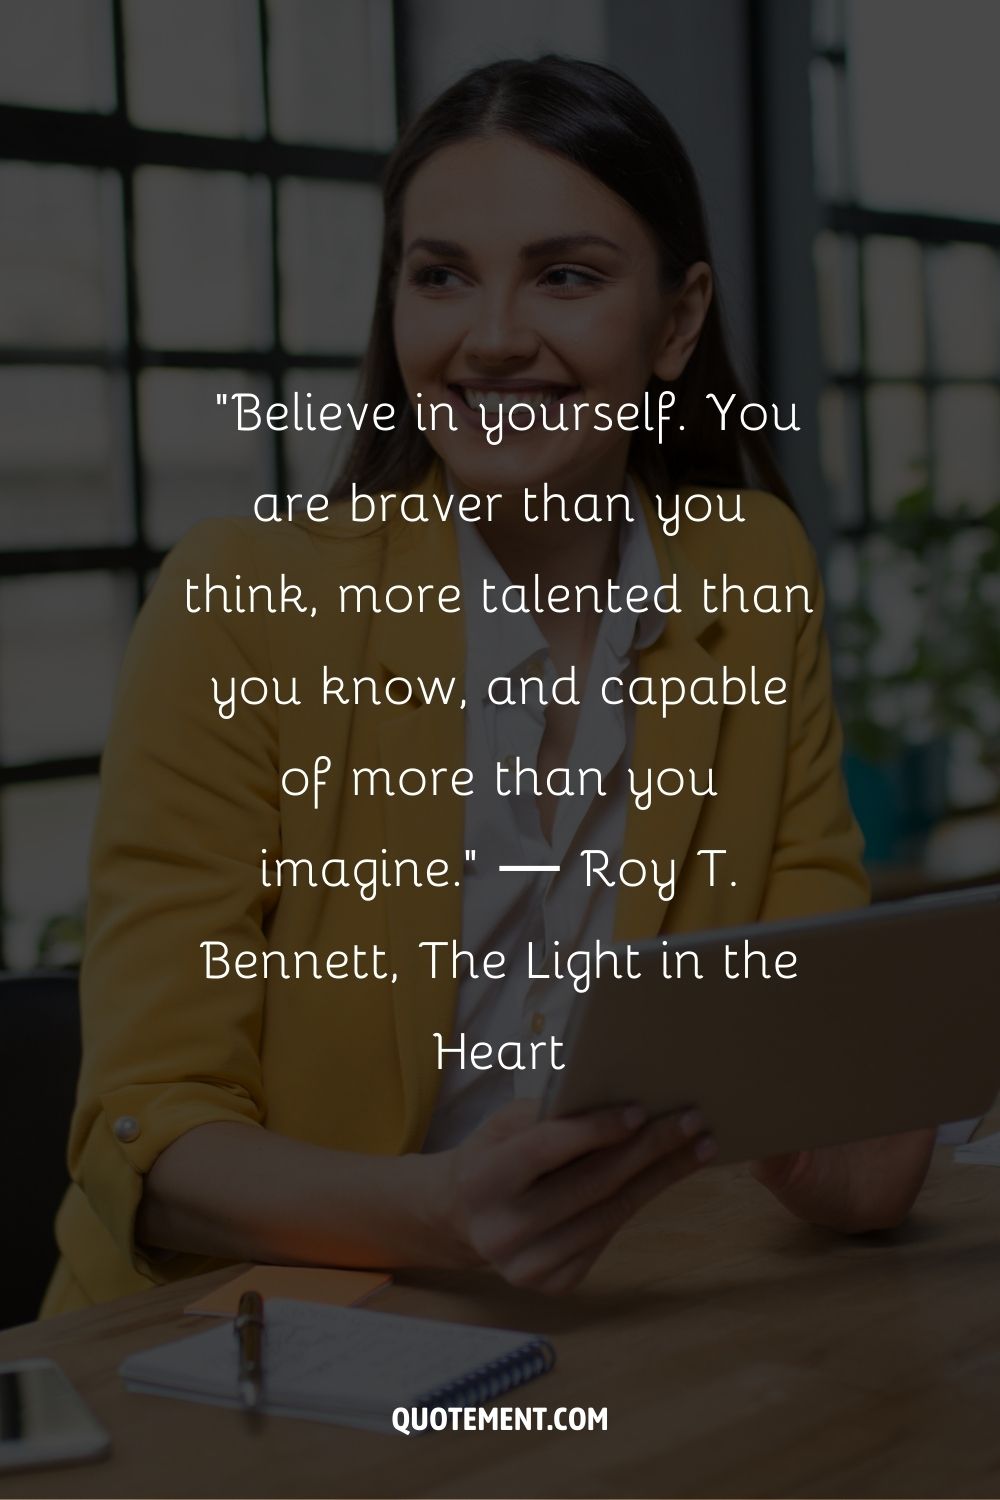 “Believe in yourself. You are braver than you think, more talented than you know, and capable of more than you imagine.” ― Roy T. Bennett, The Light in the Heart